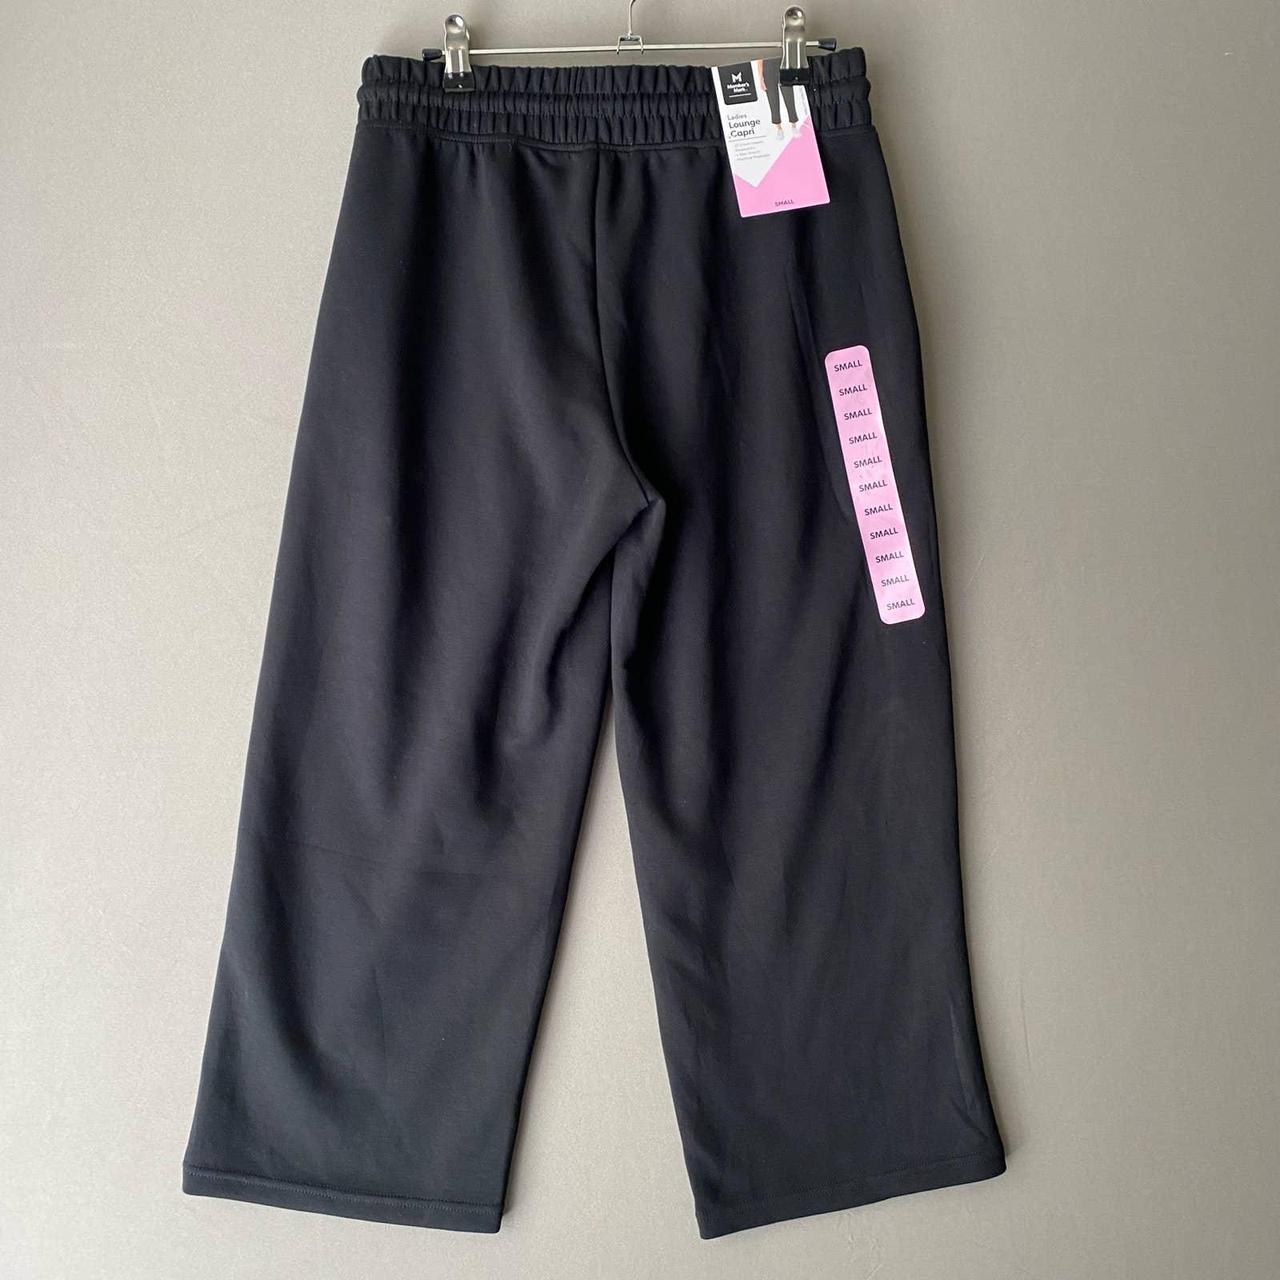 ONLY women's black trousers